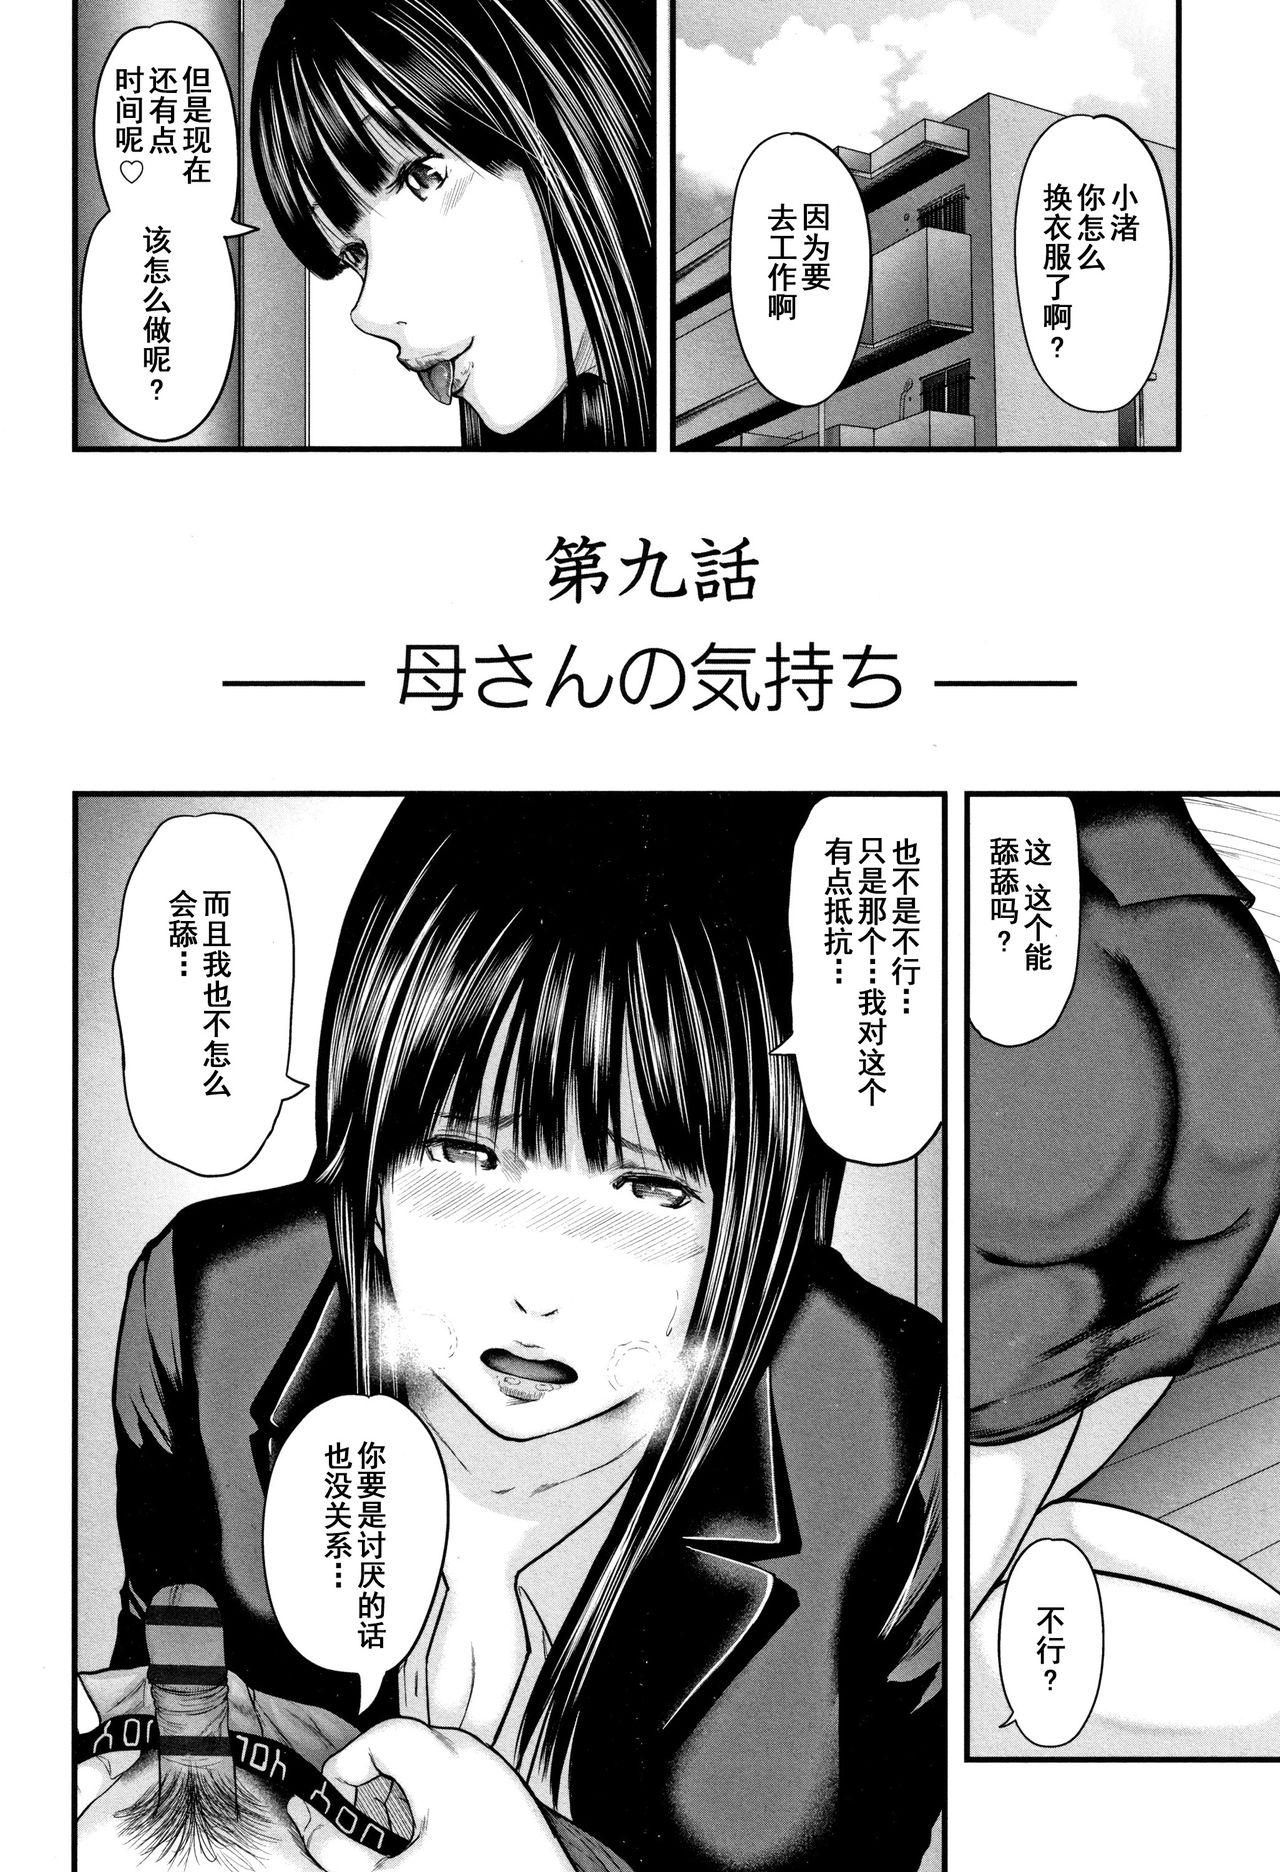 Brunette Soukan no Replica 2 - Replica of Mother Actress - Page 8